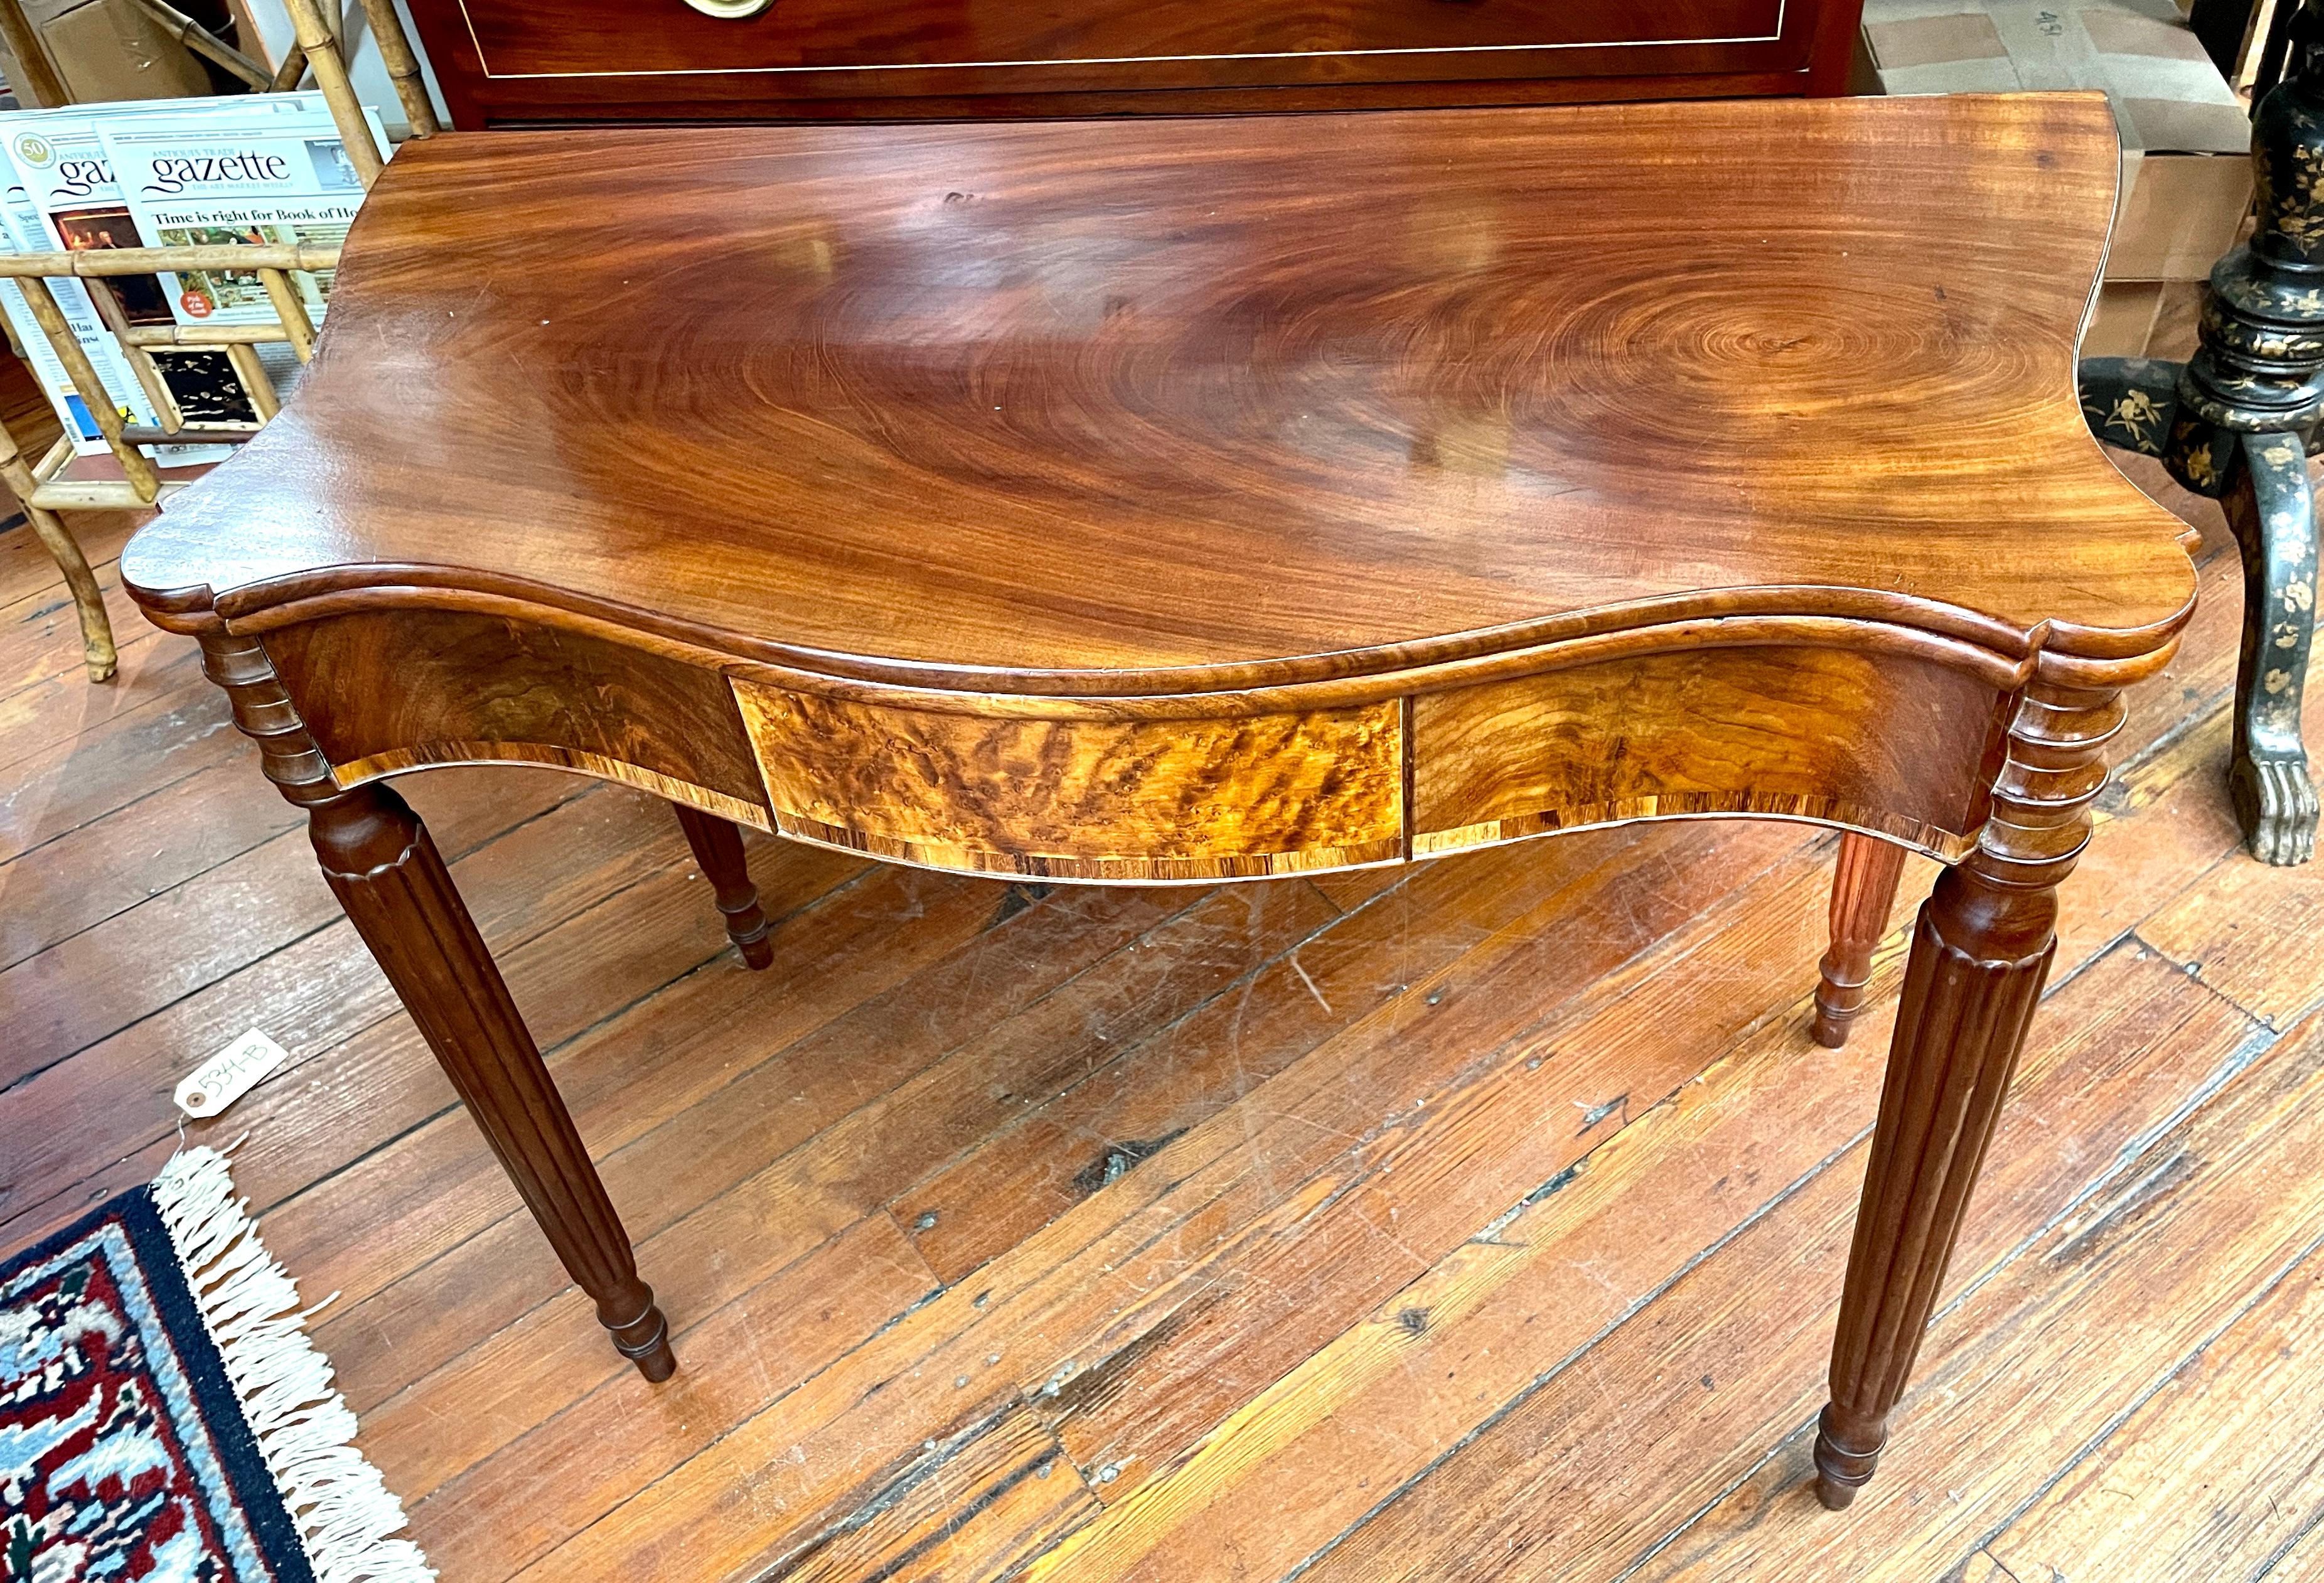 Exceptional quality antique American (likely Boston or North Shore of Massachusetts) inlaid figured mahogany Sheraton style serpentine flap-top games table with rosewood crossbanding and a central panel of highly figured satin birch.

This